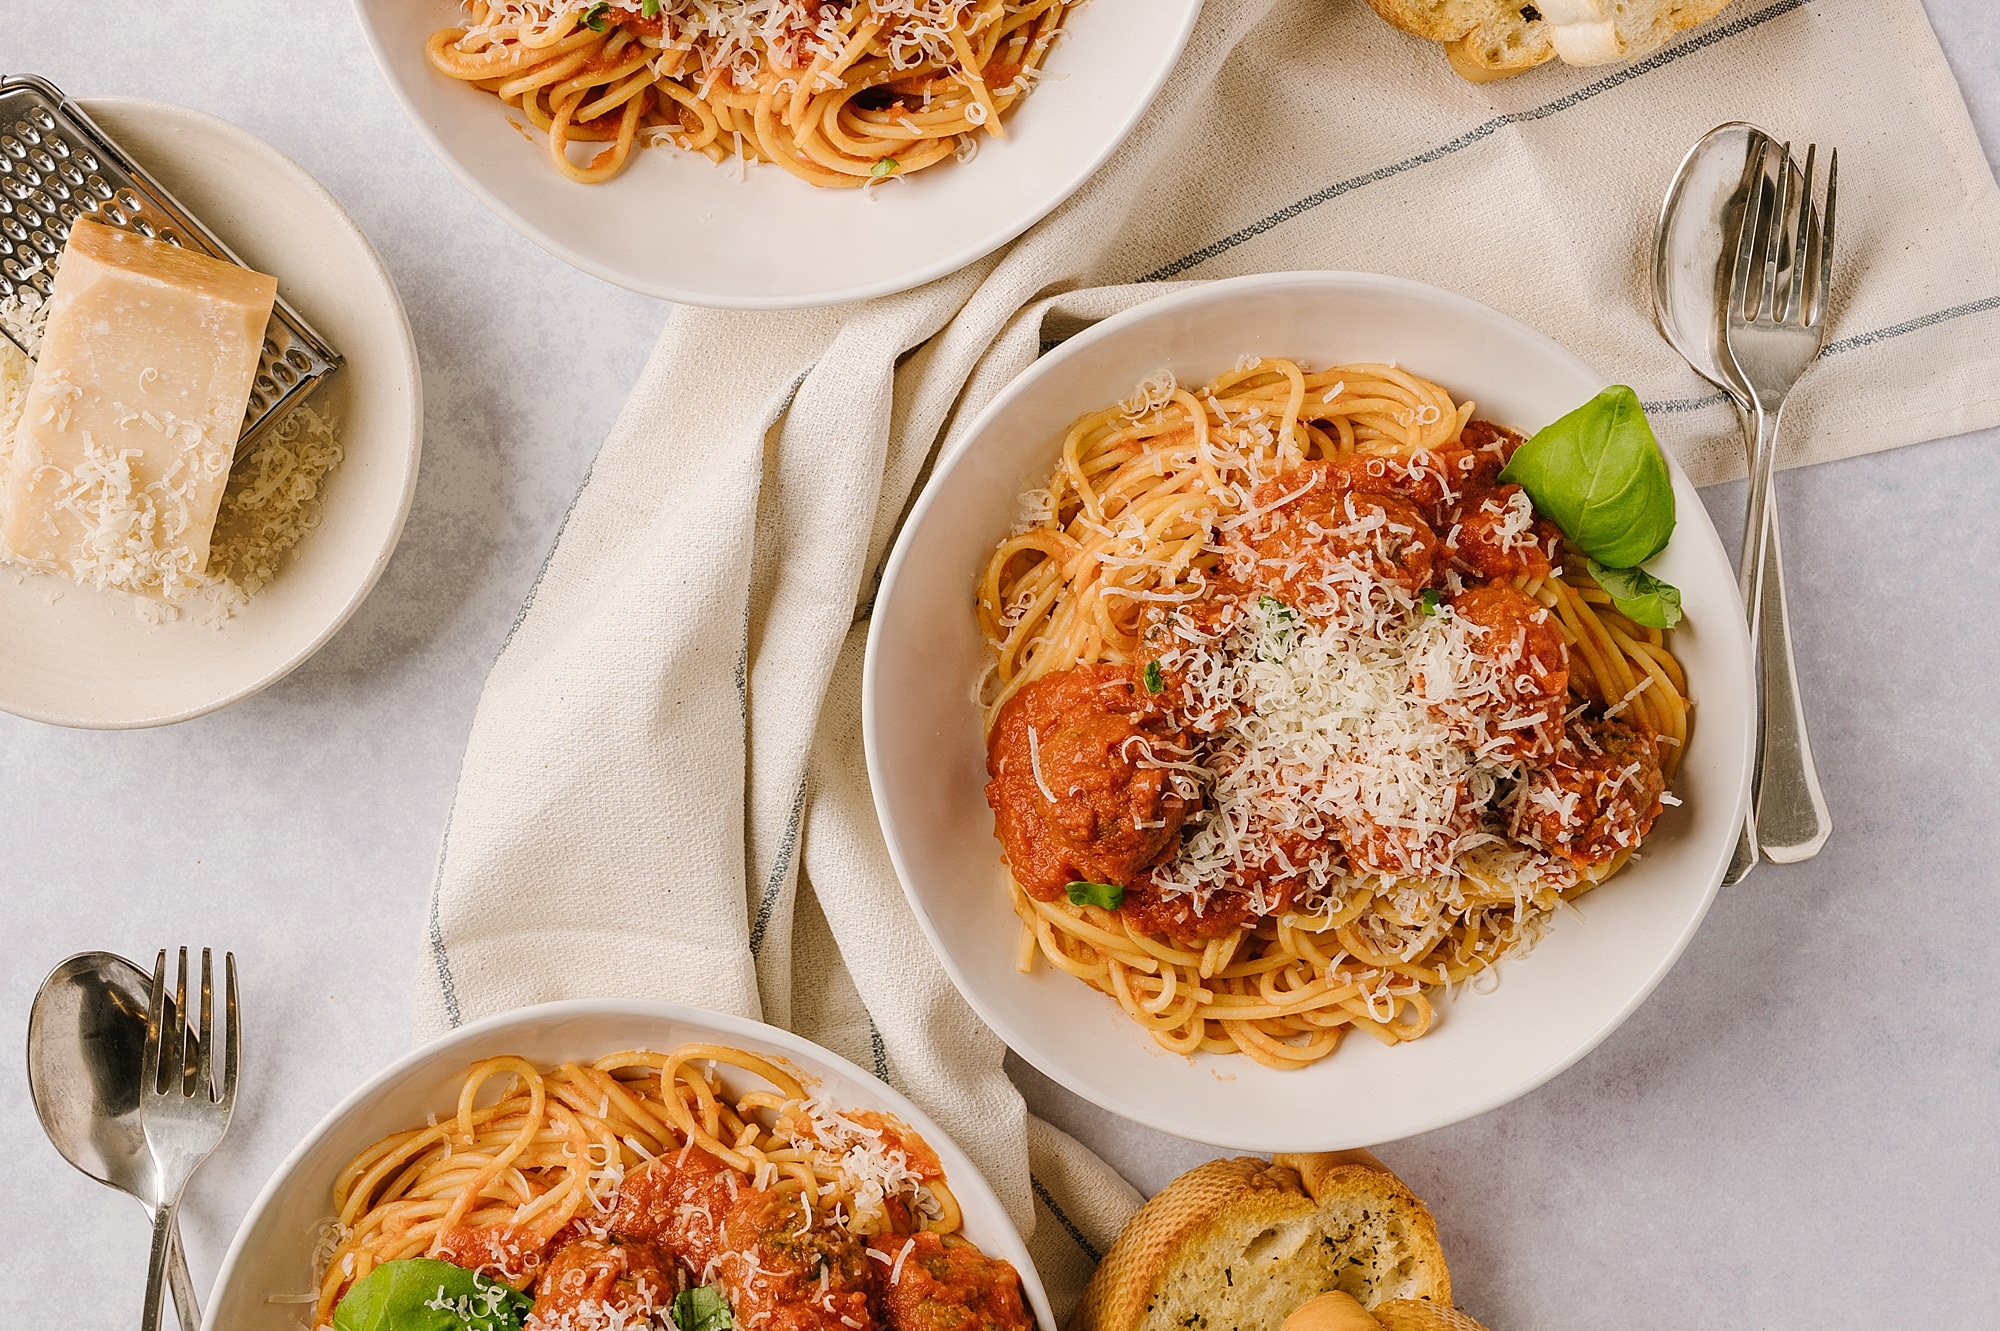 plates of spaghetti and meatballs with parmesan cheese